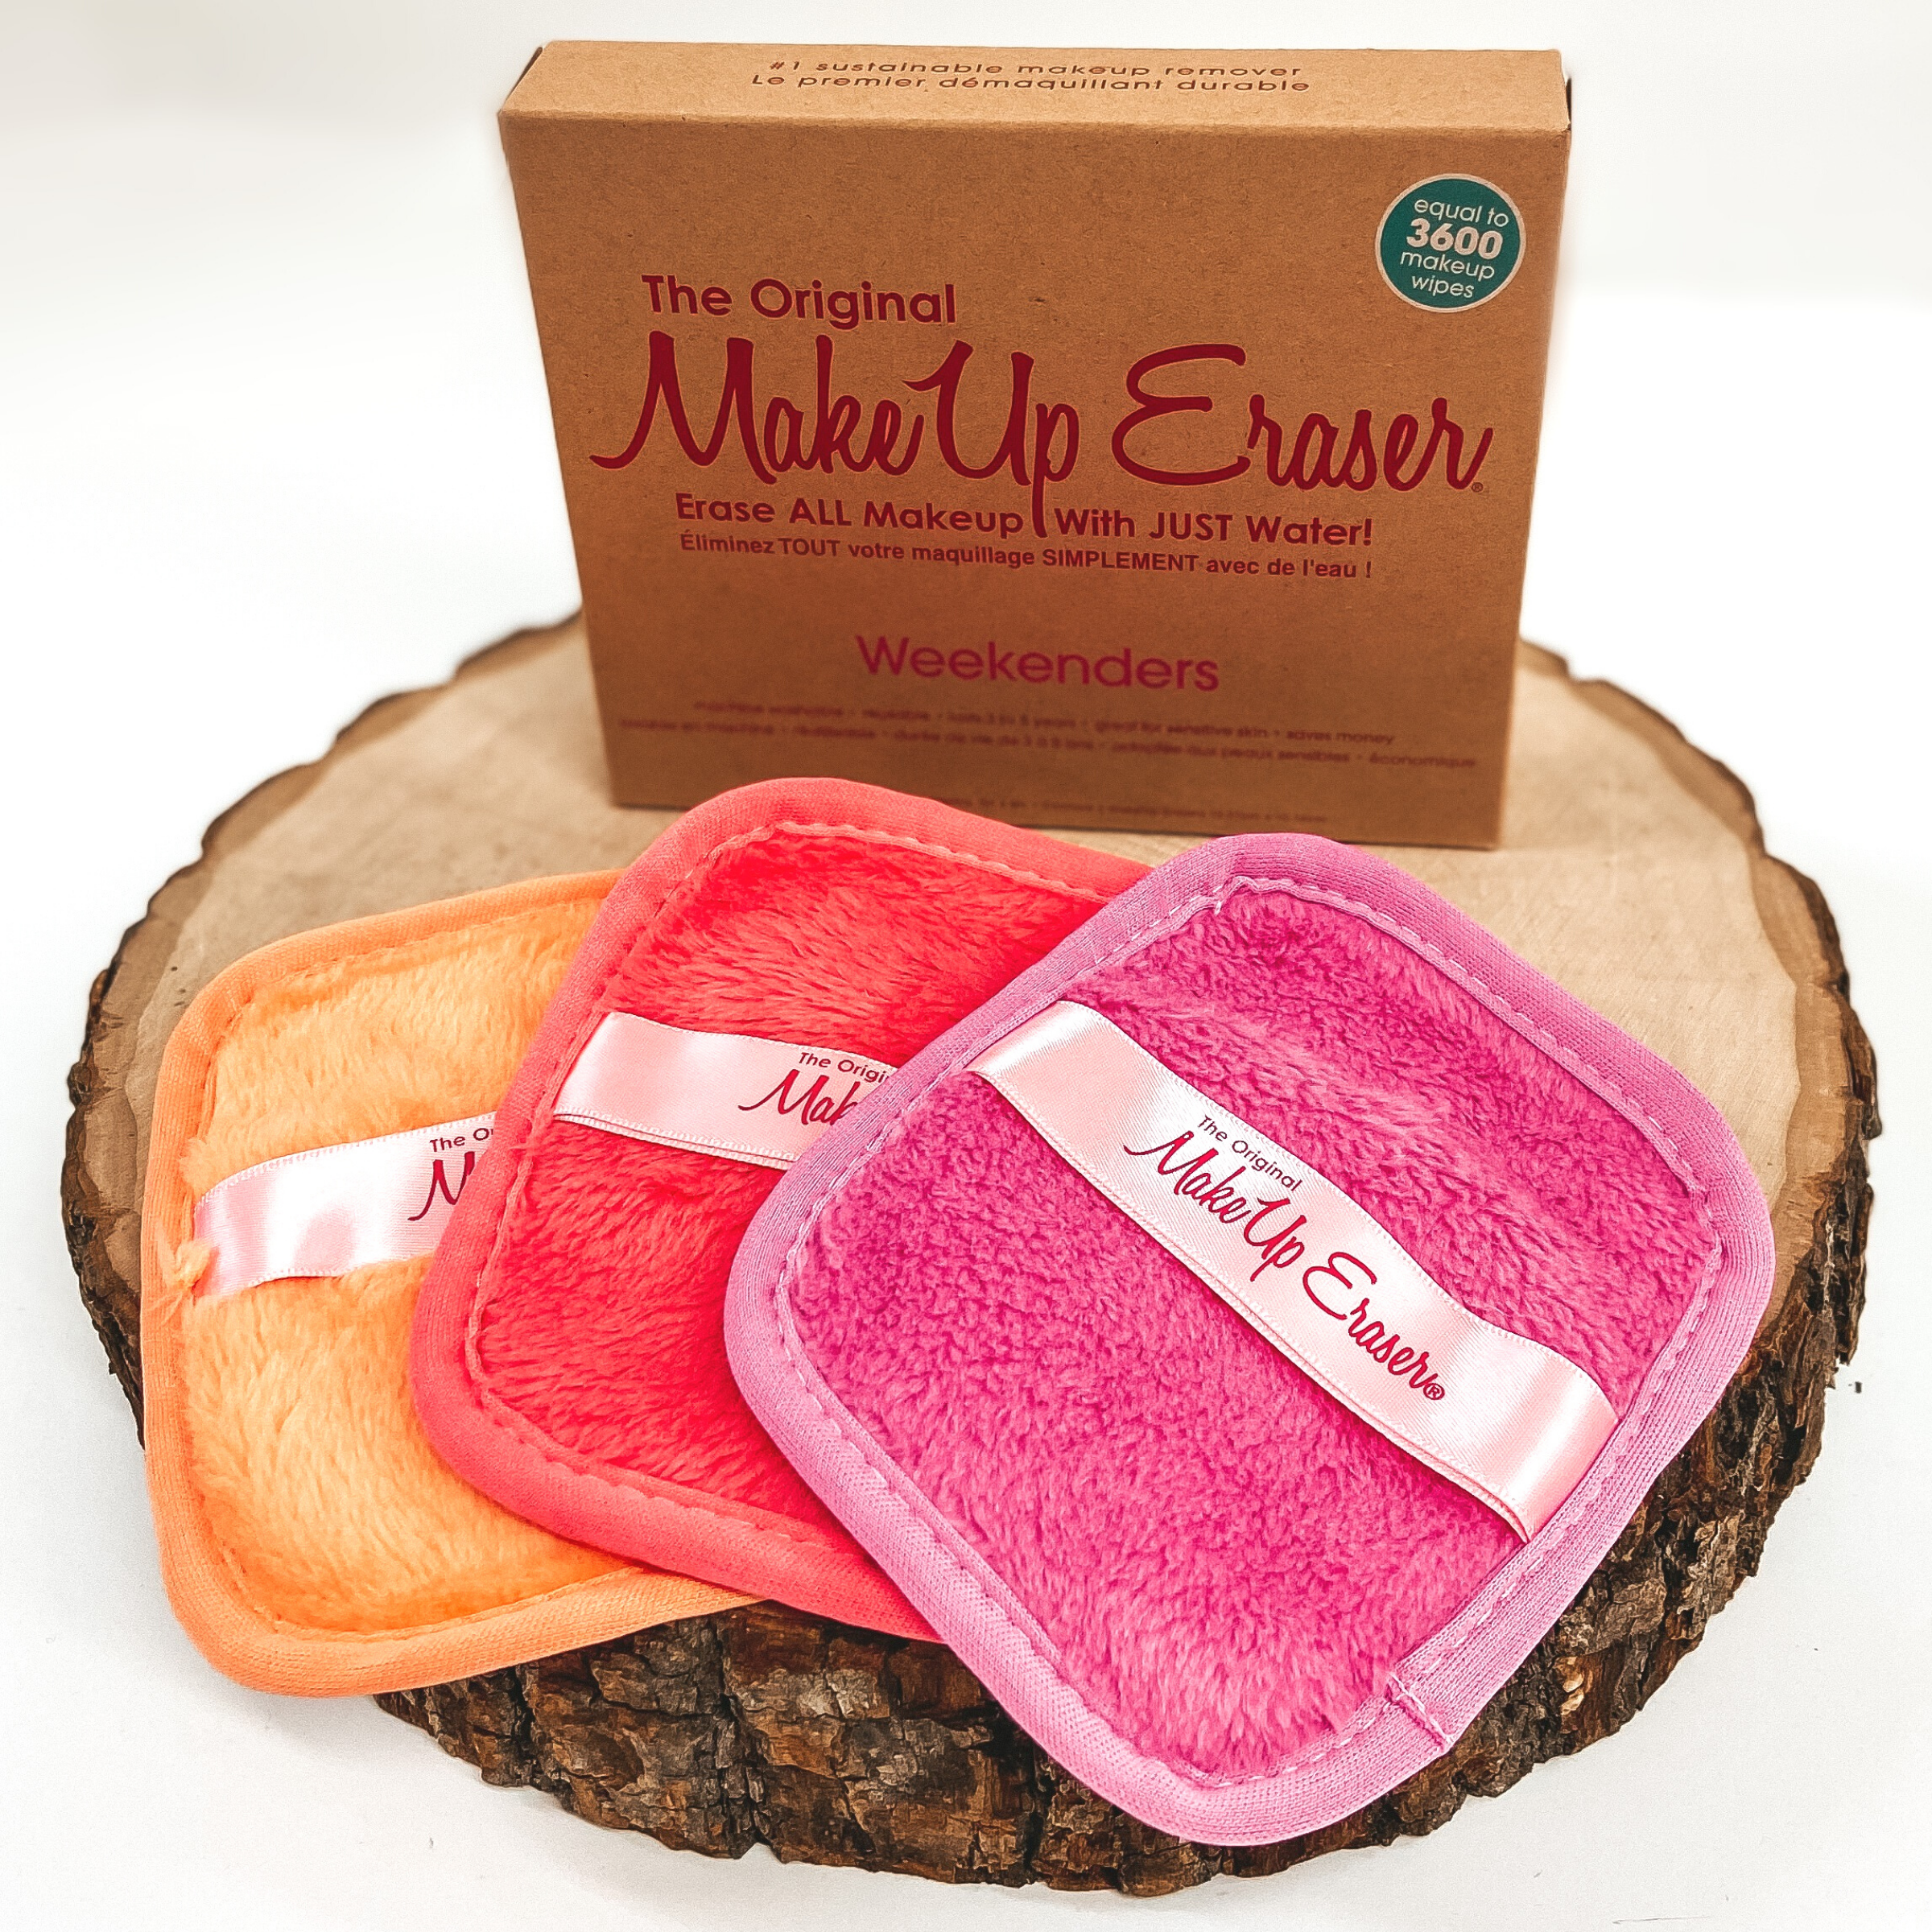 There are three small, rounded rectangle cloths laying on top of each other with light pink tags across the middle of each cloths. These clothes are laying on a piece of wood with the pink cloth laying on top of the coral cloth that is laying on an orange cloth. Behind these cloths is a brown box standing up right on the piece of wood. This is all pictured on a white background.